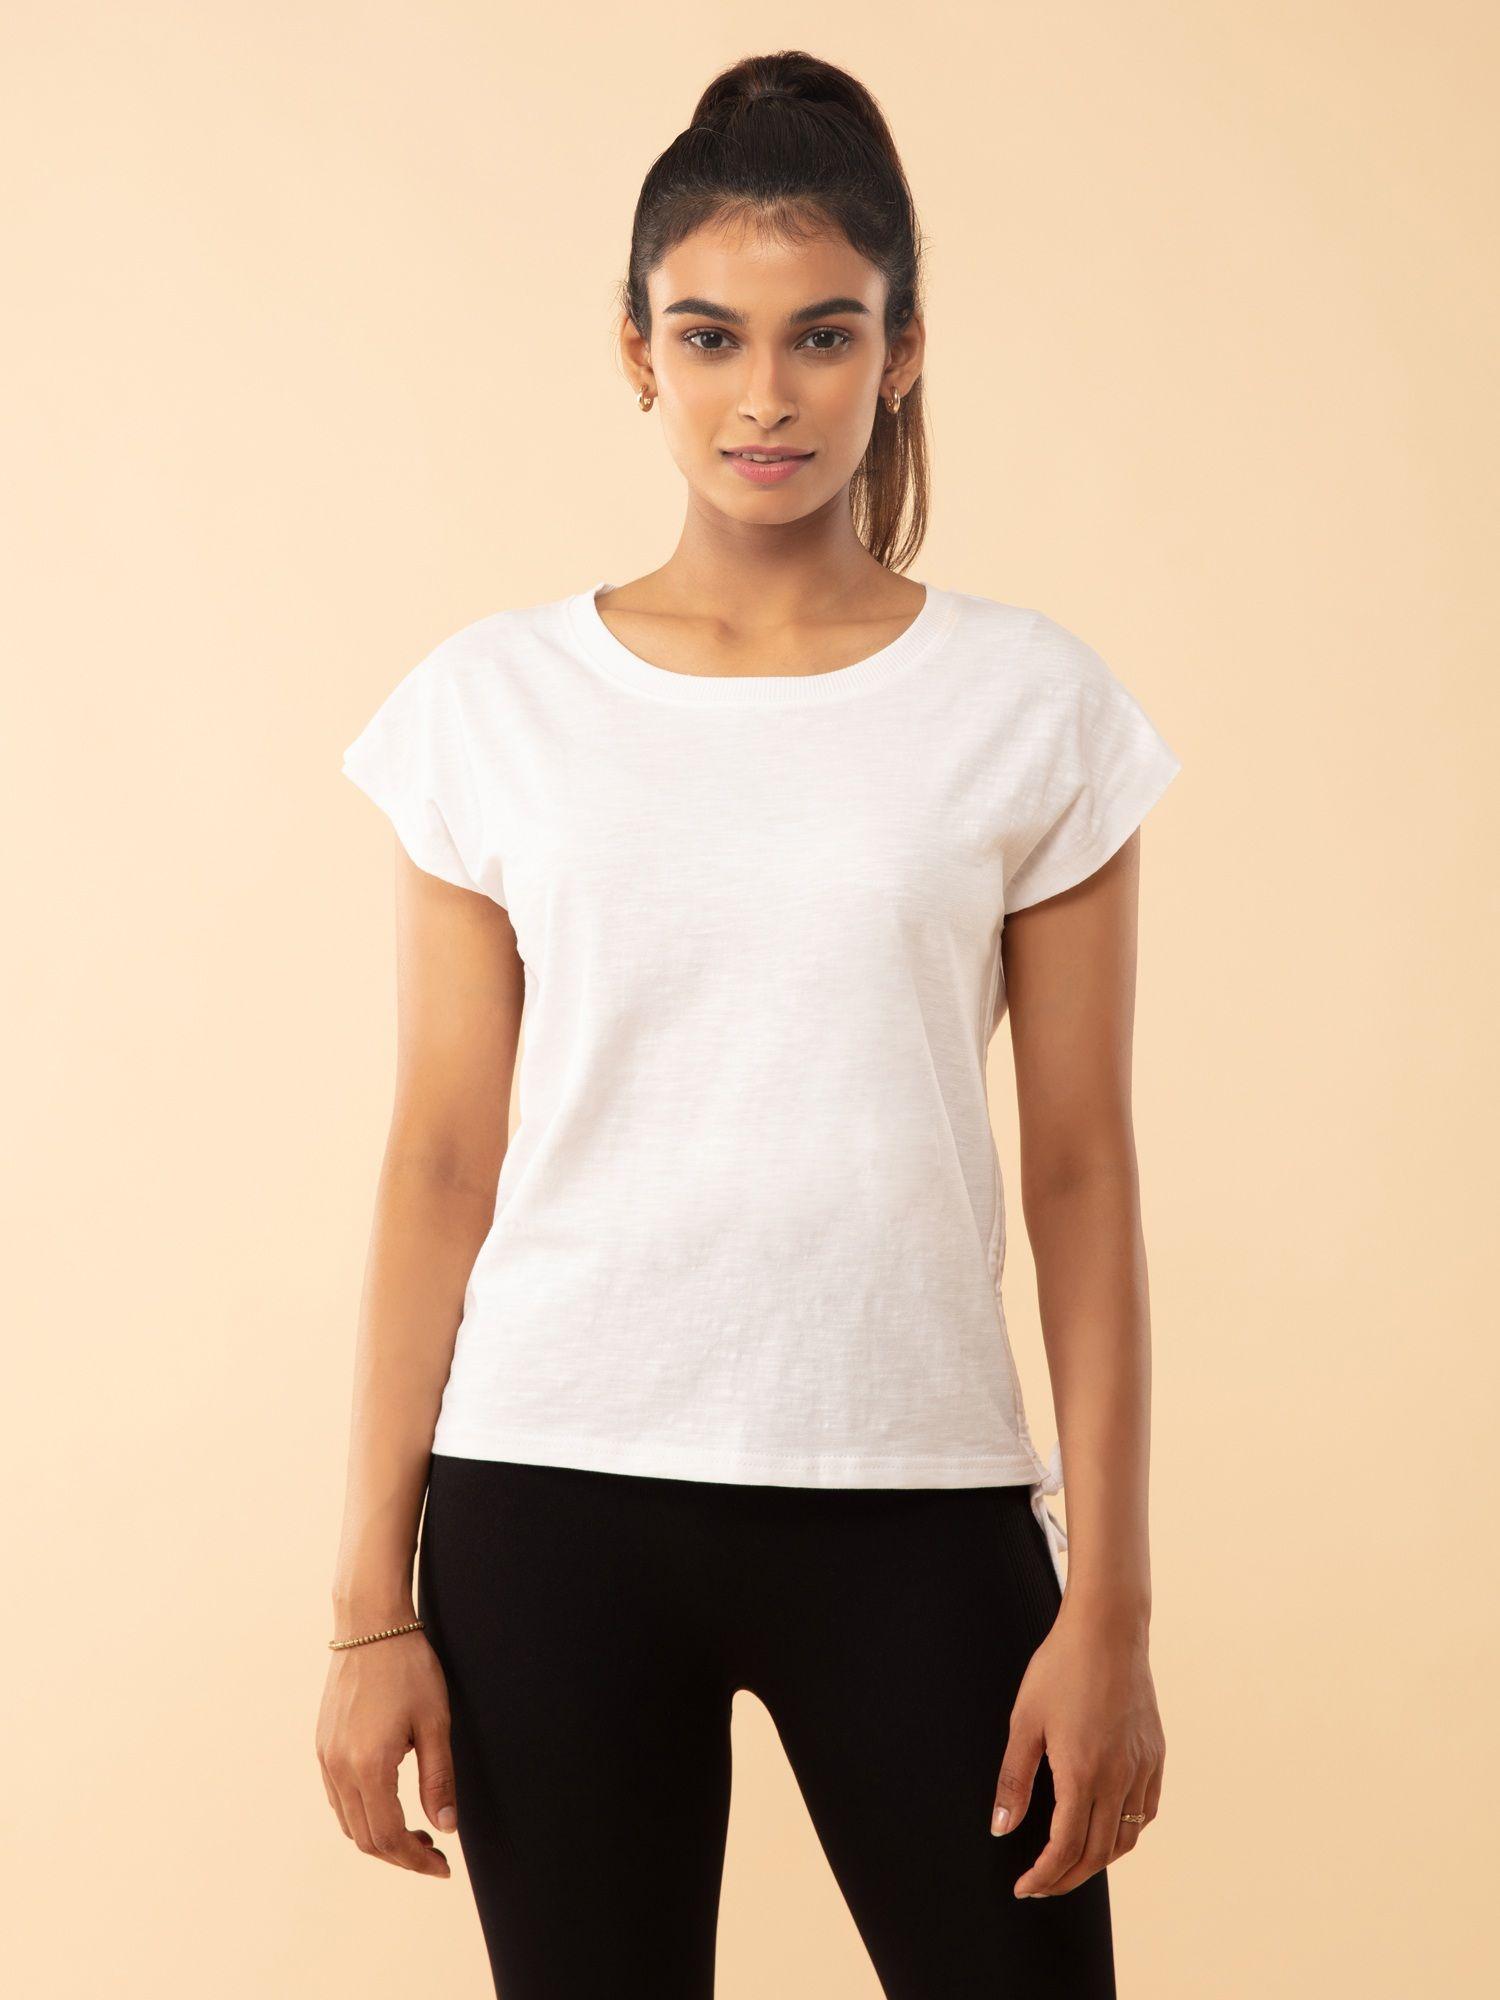 summer tee with pull up ruching at sides - nyat240 bright white